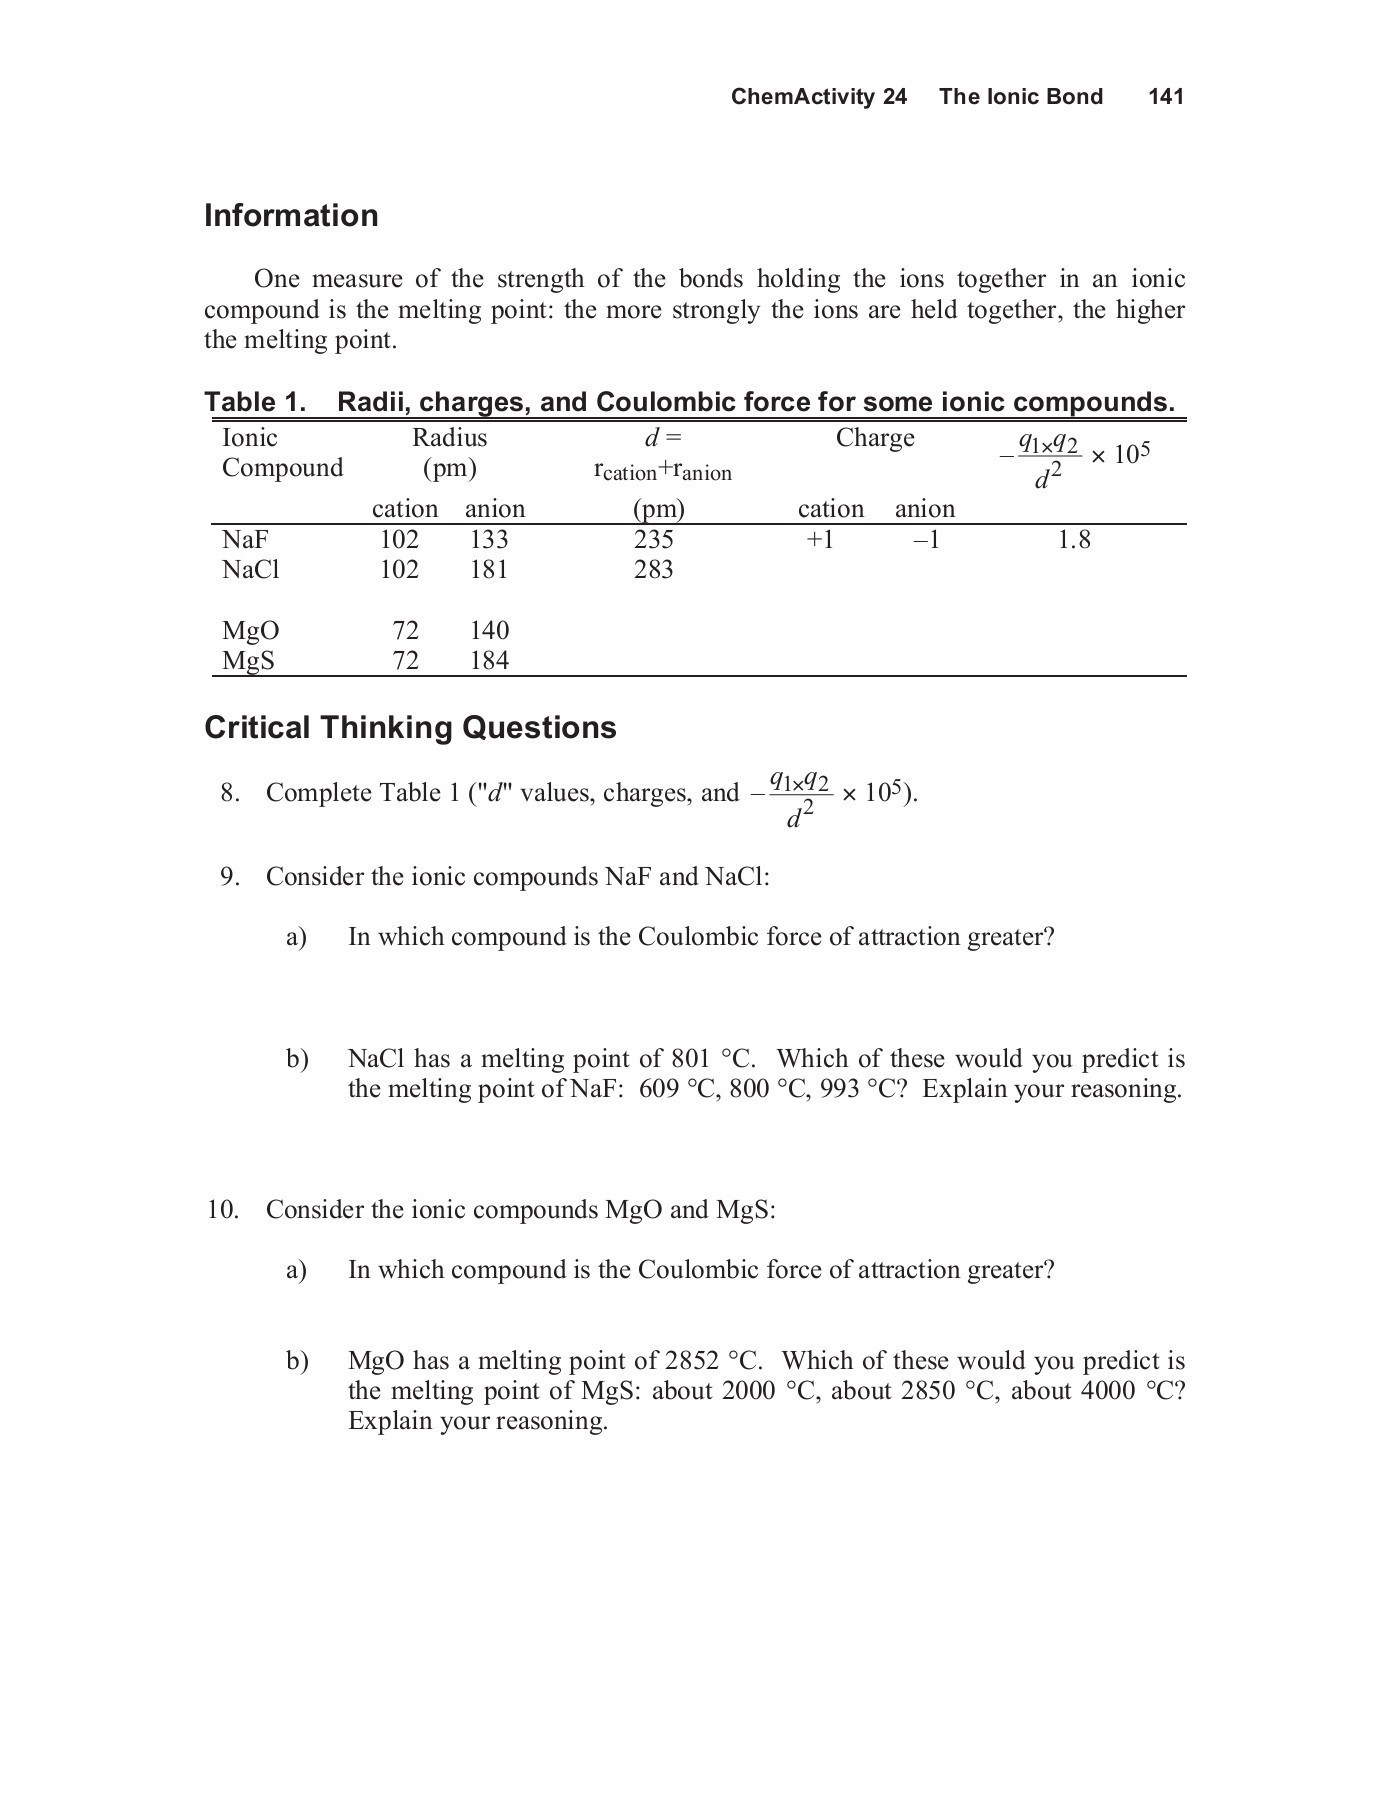 Worksheet Polarity Of Bonds Answers Chemistry A Guided Inquiry Pages 151 200 Text Version